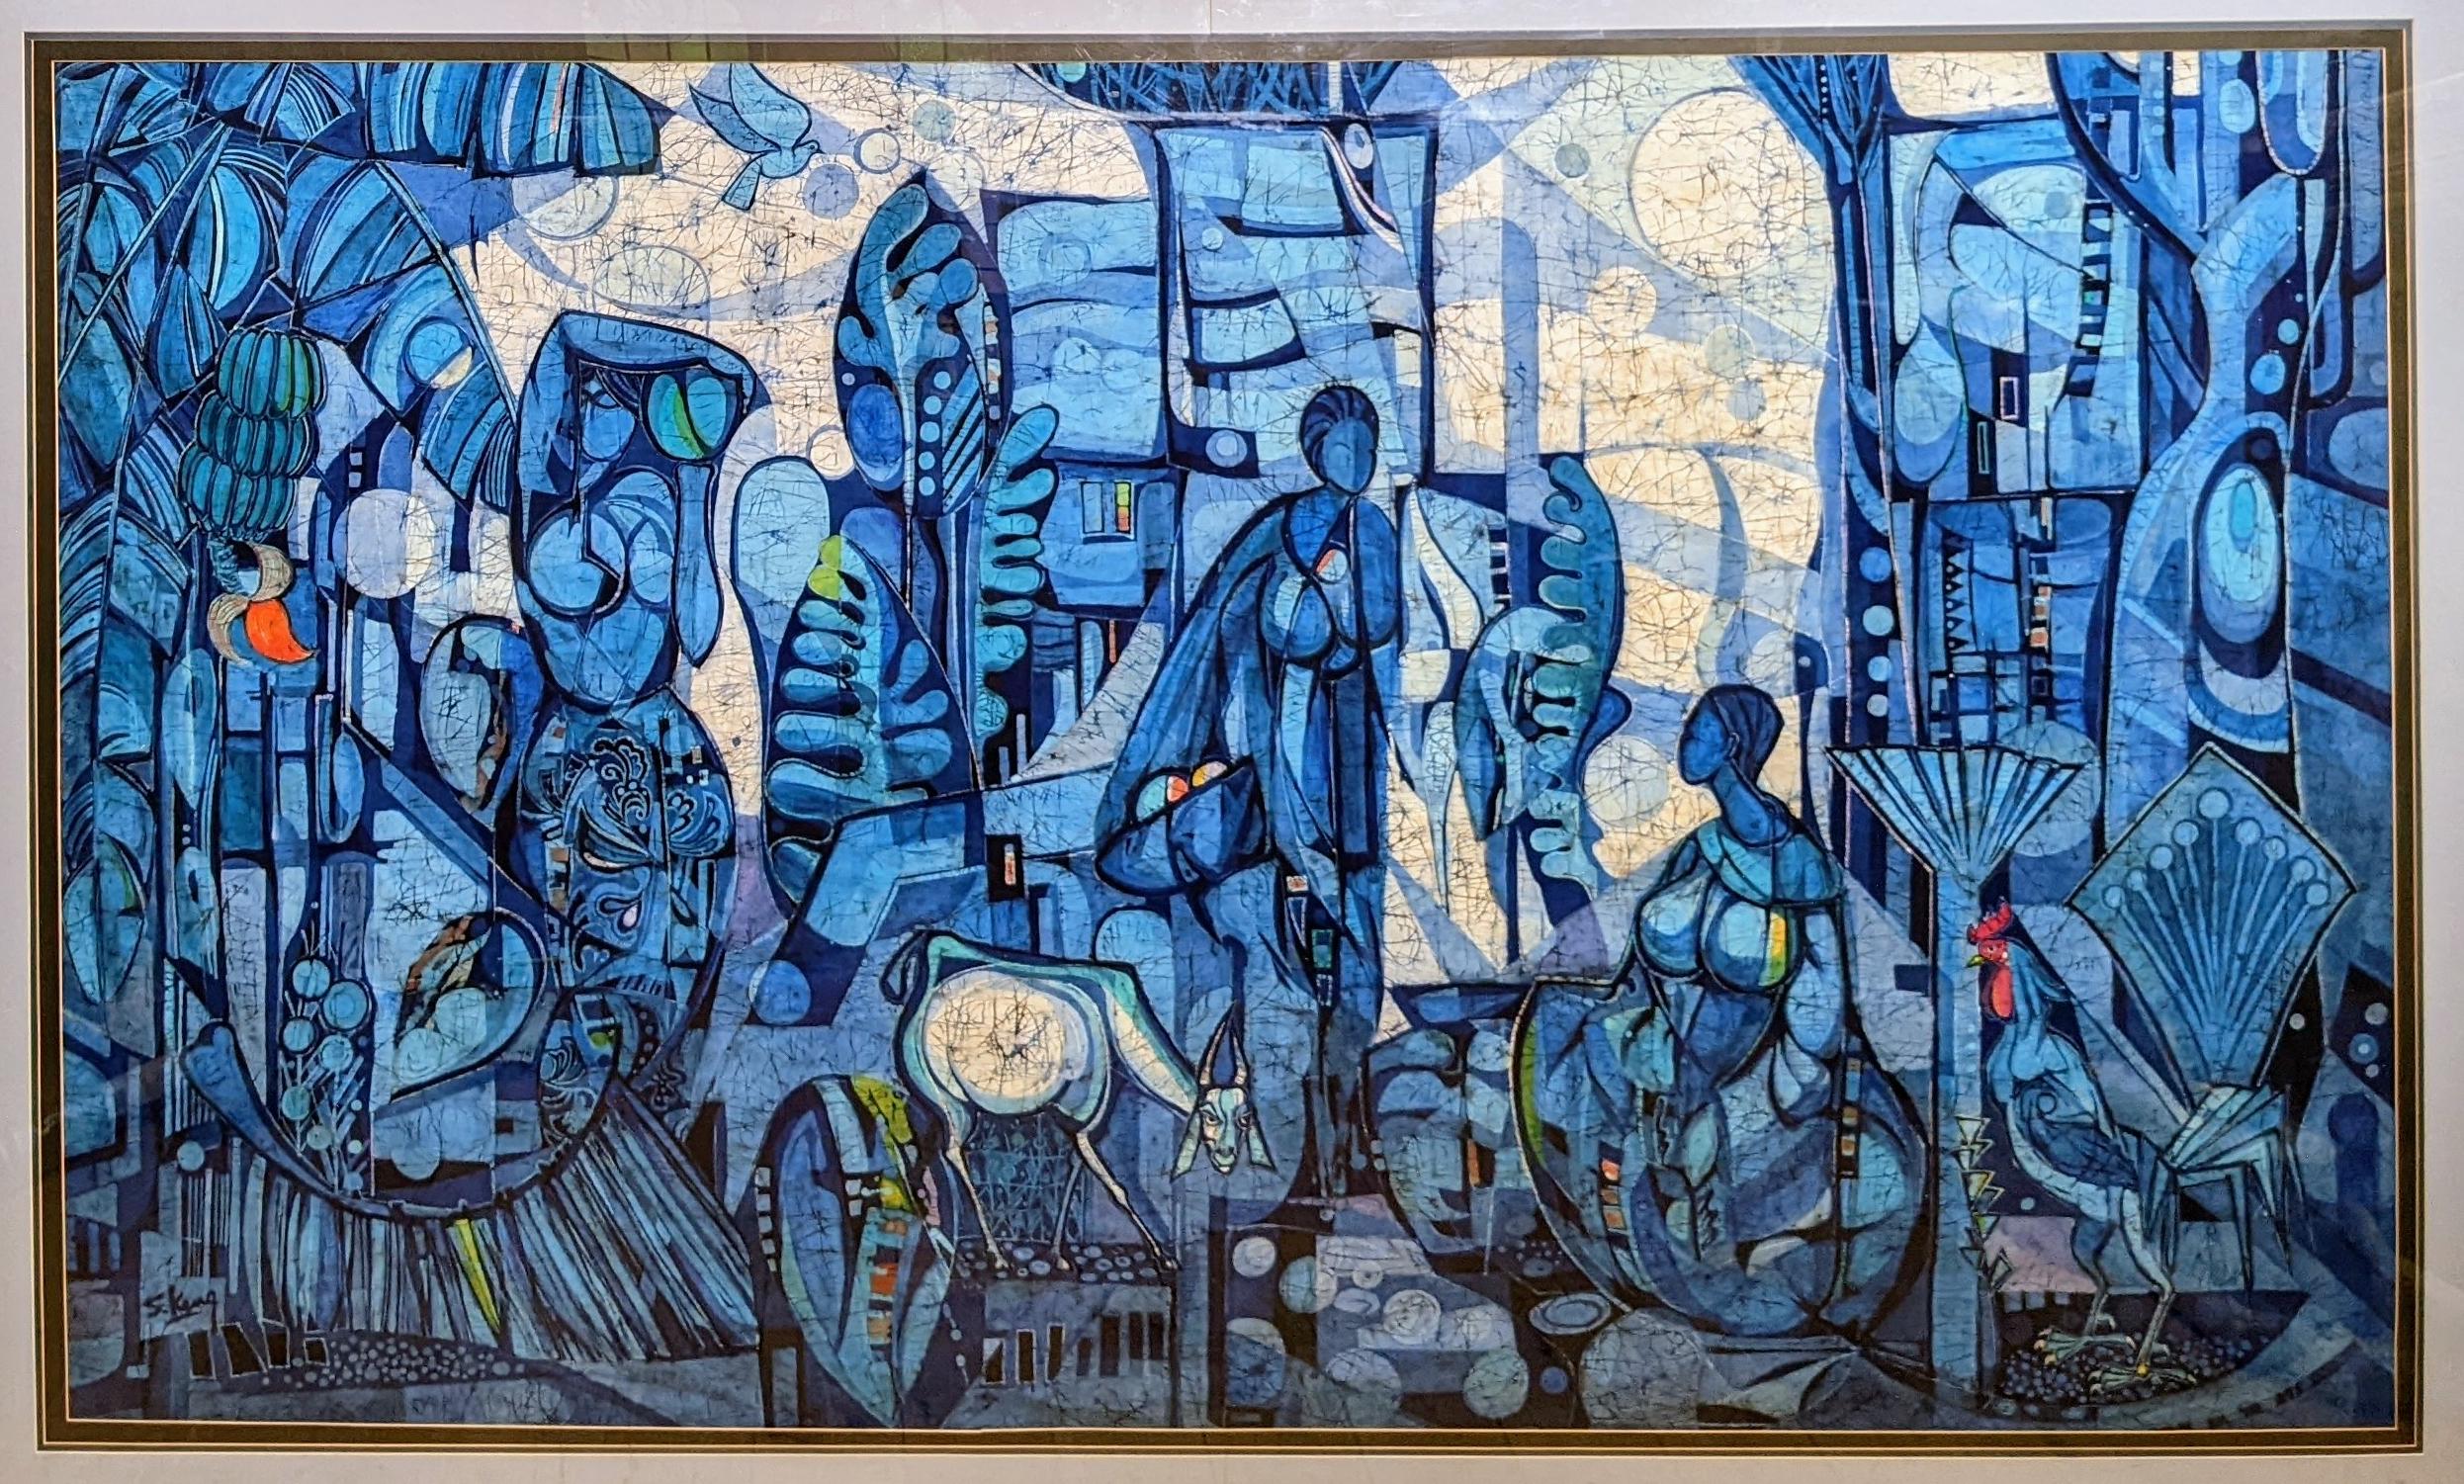 Chuah Seow Keng , born 1945 . Large abstract batik painting in excellent condition with bright vivid colours . 

Chuah Seow Keng was born in 1945 and is a renowned artist from Malaysia who has made significant contributions to the art world. His